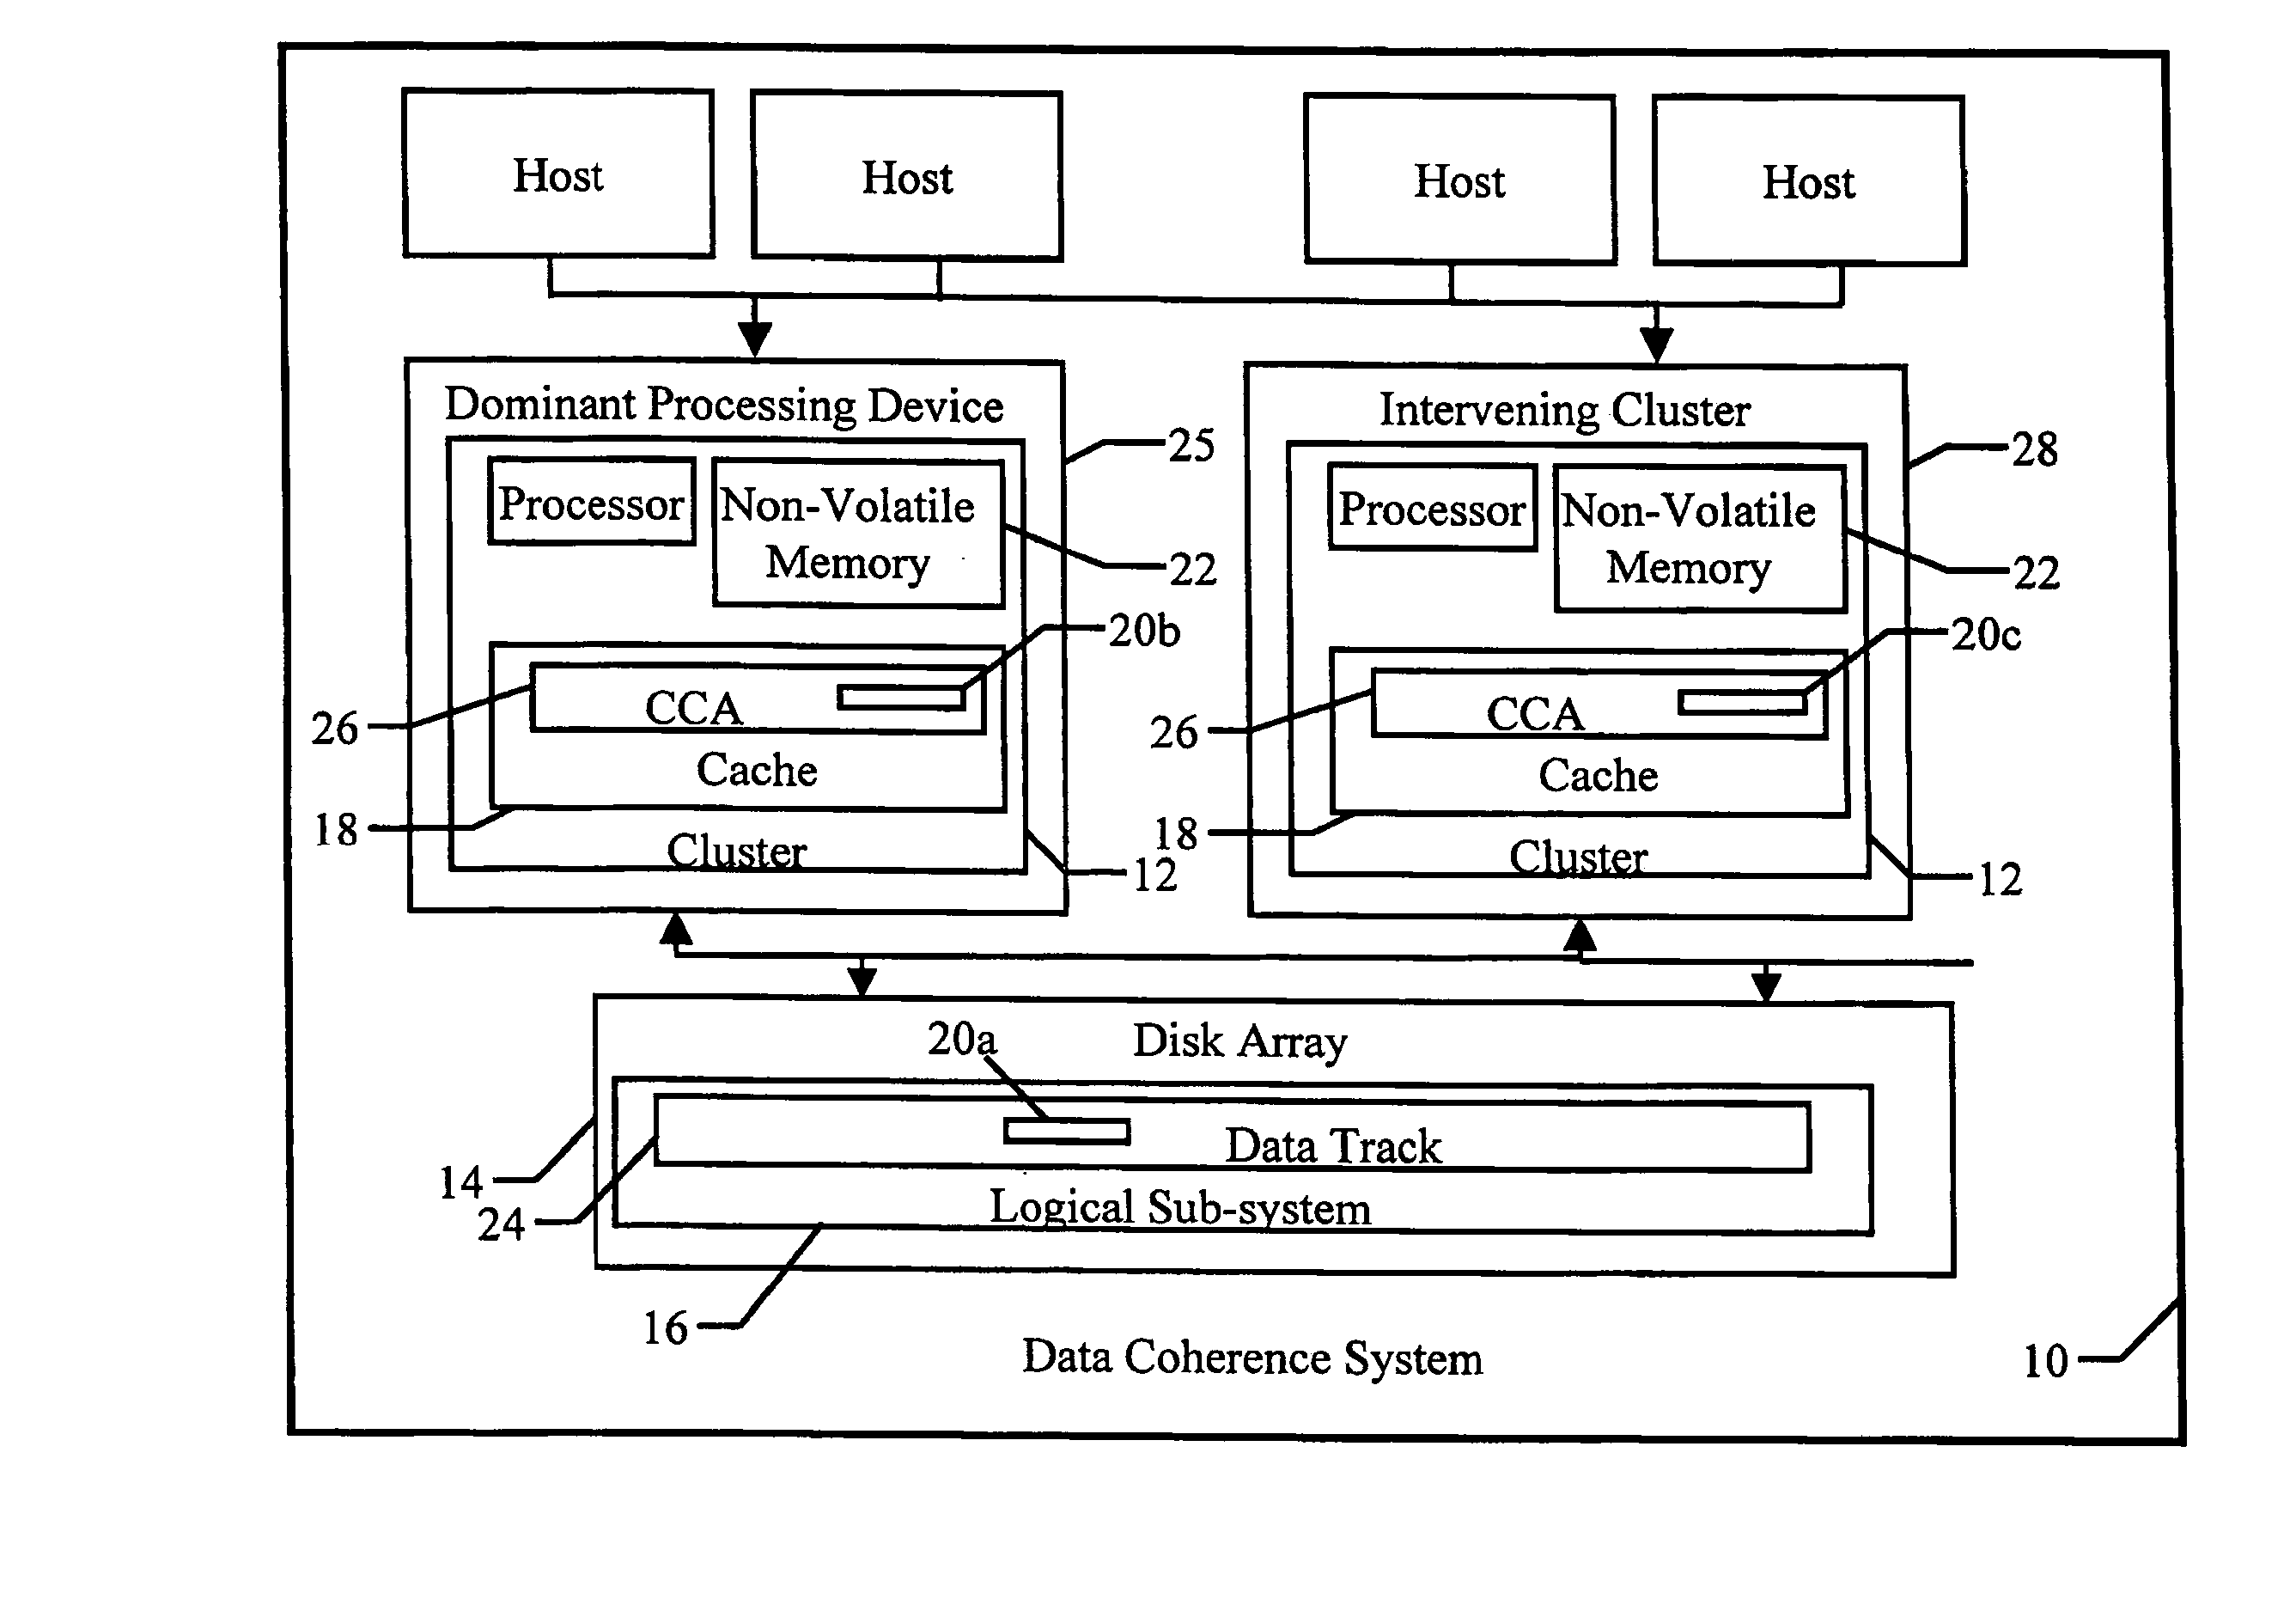 Data Coherence System